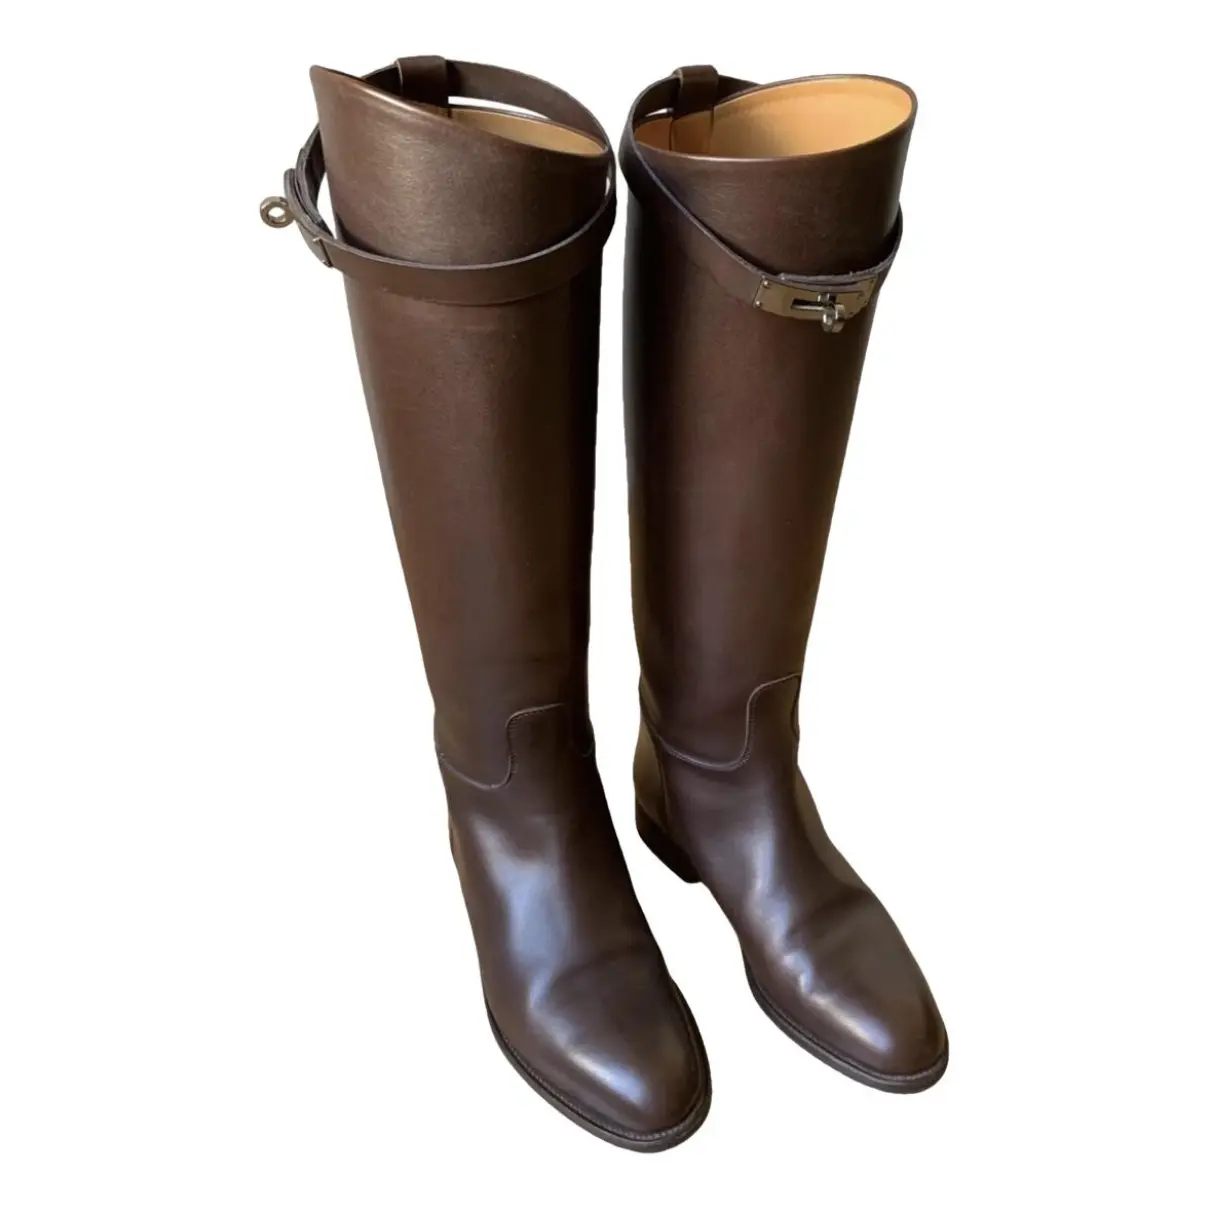 Jumping leather riding boots